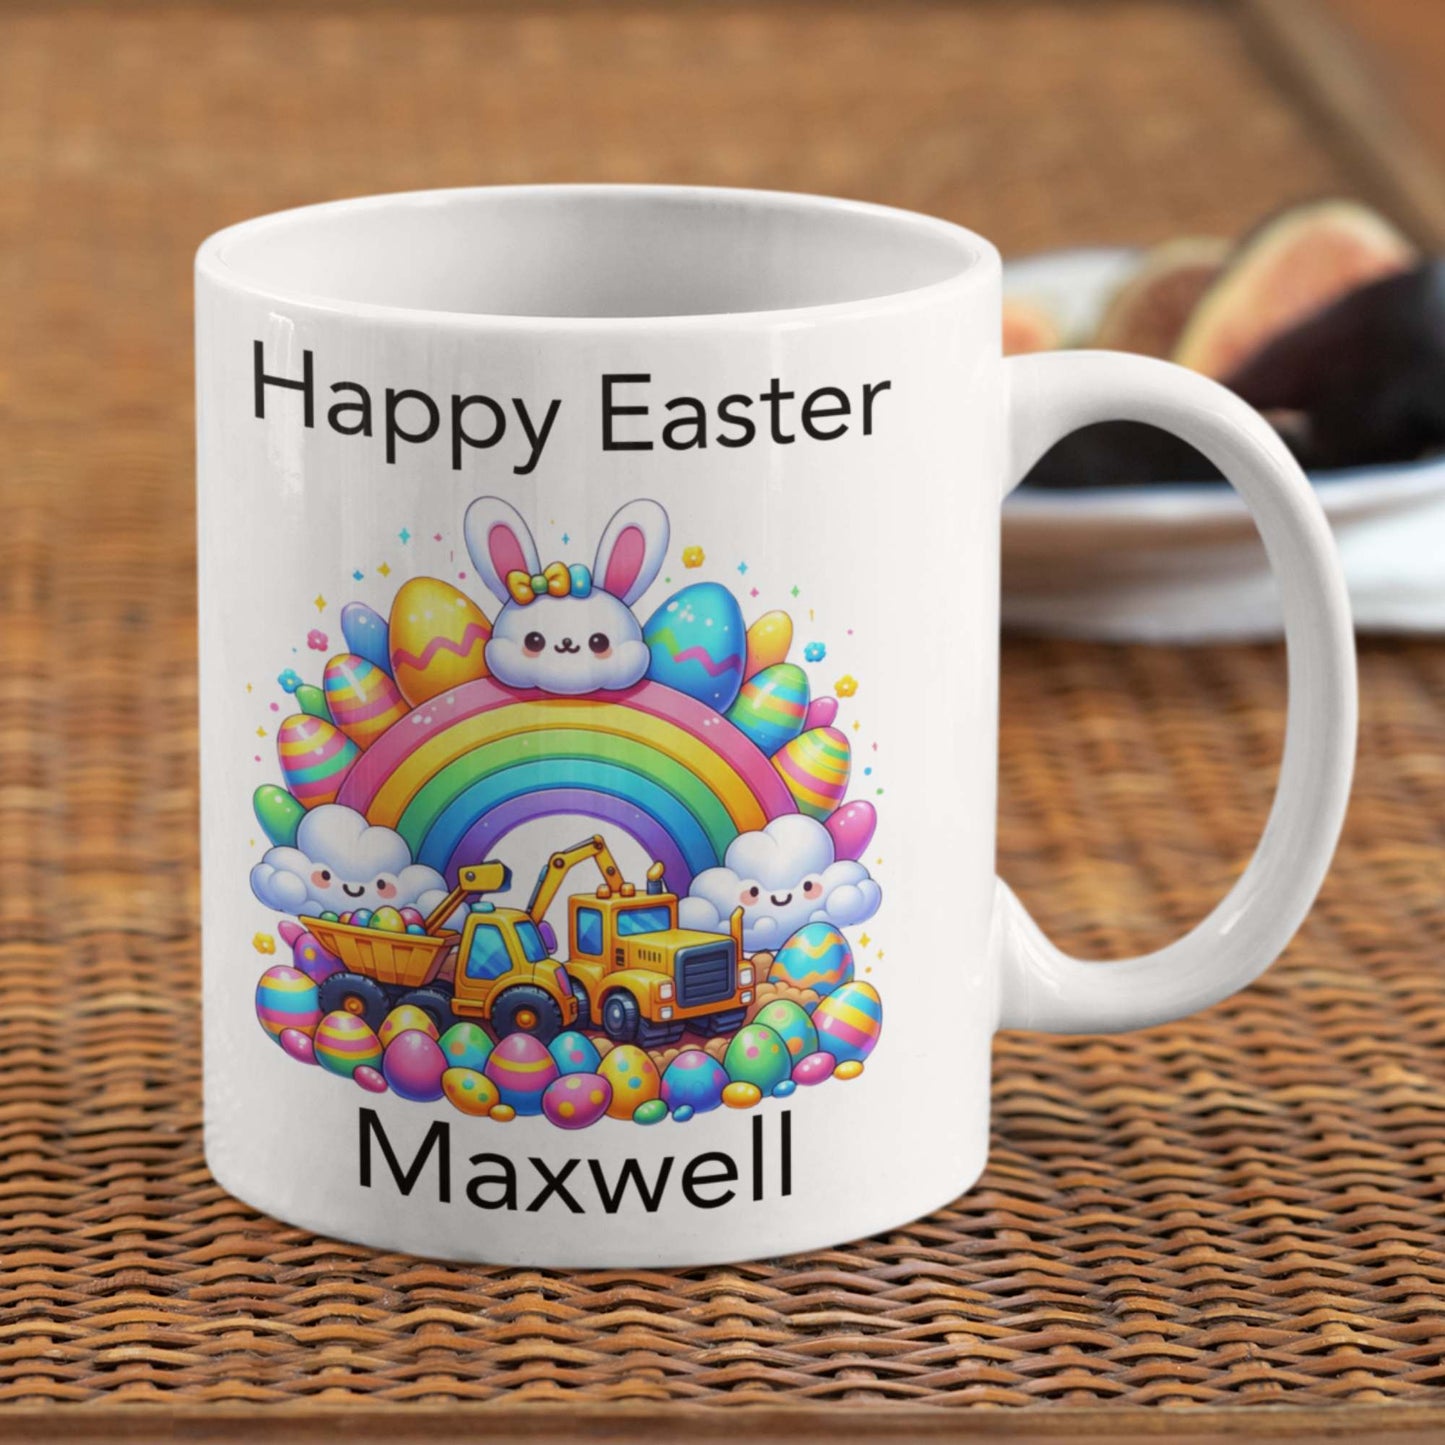 Children's Easter mug personalised with name construction vehicle theme for boys girls